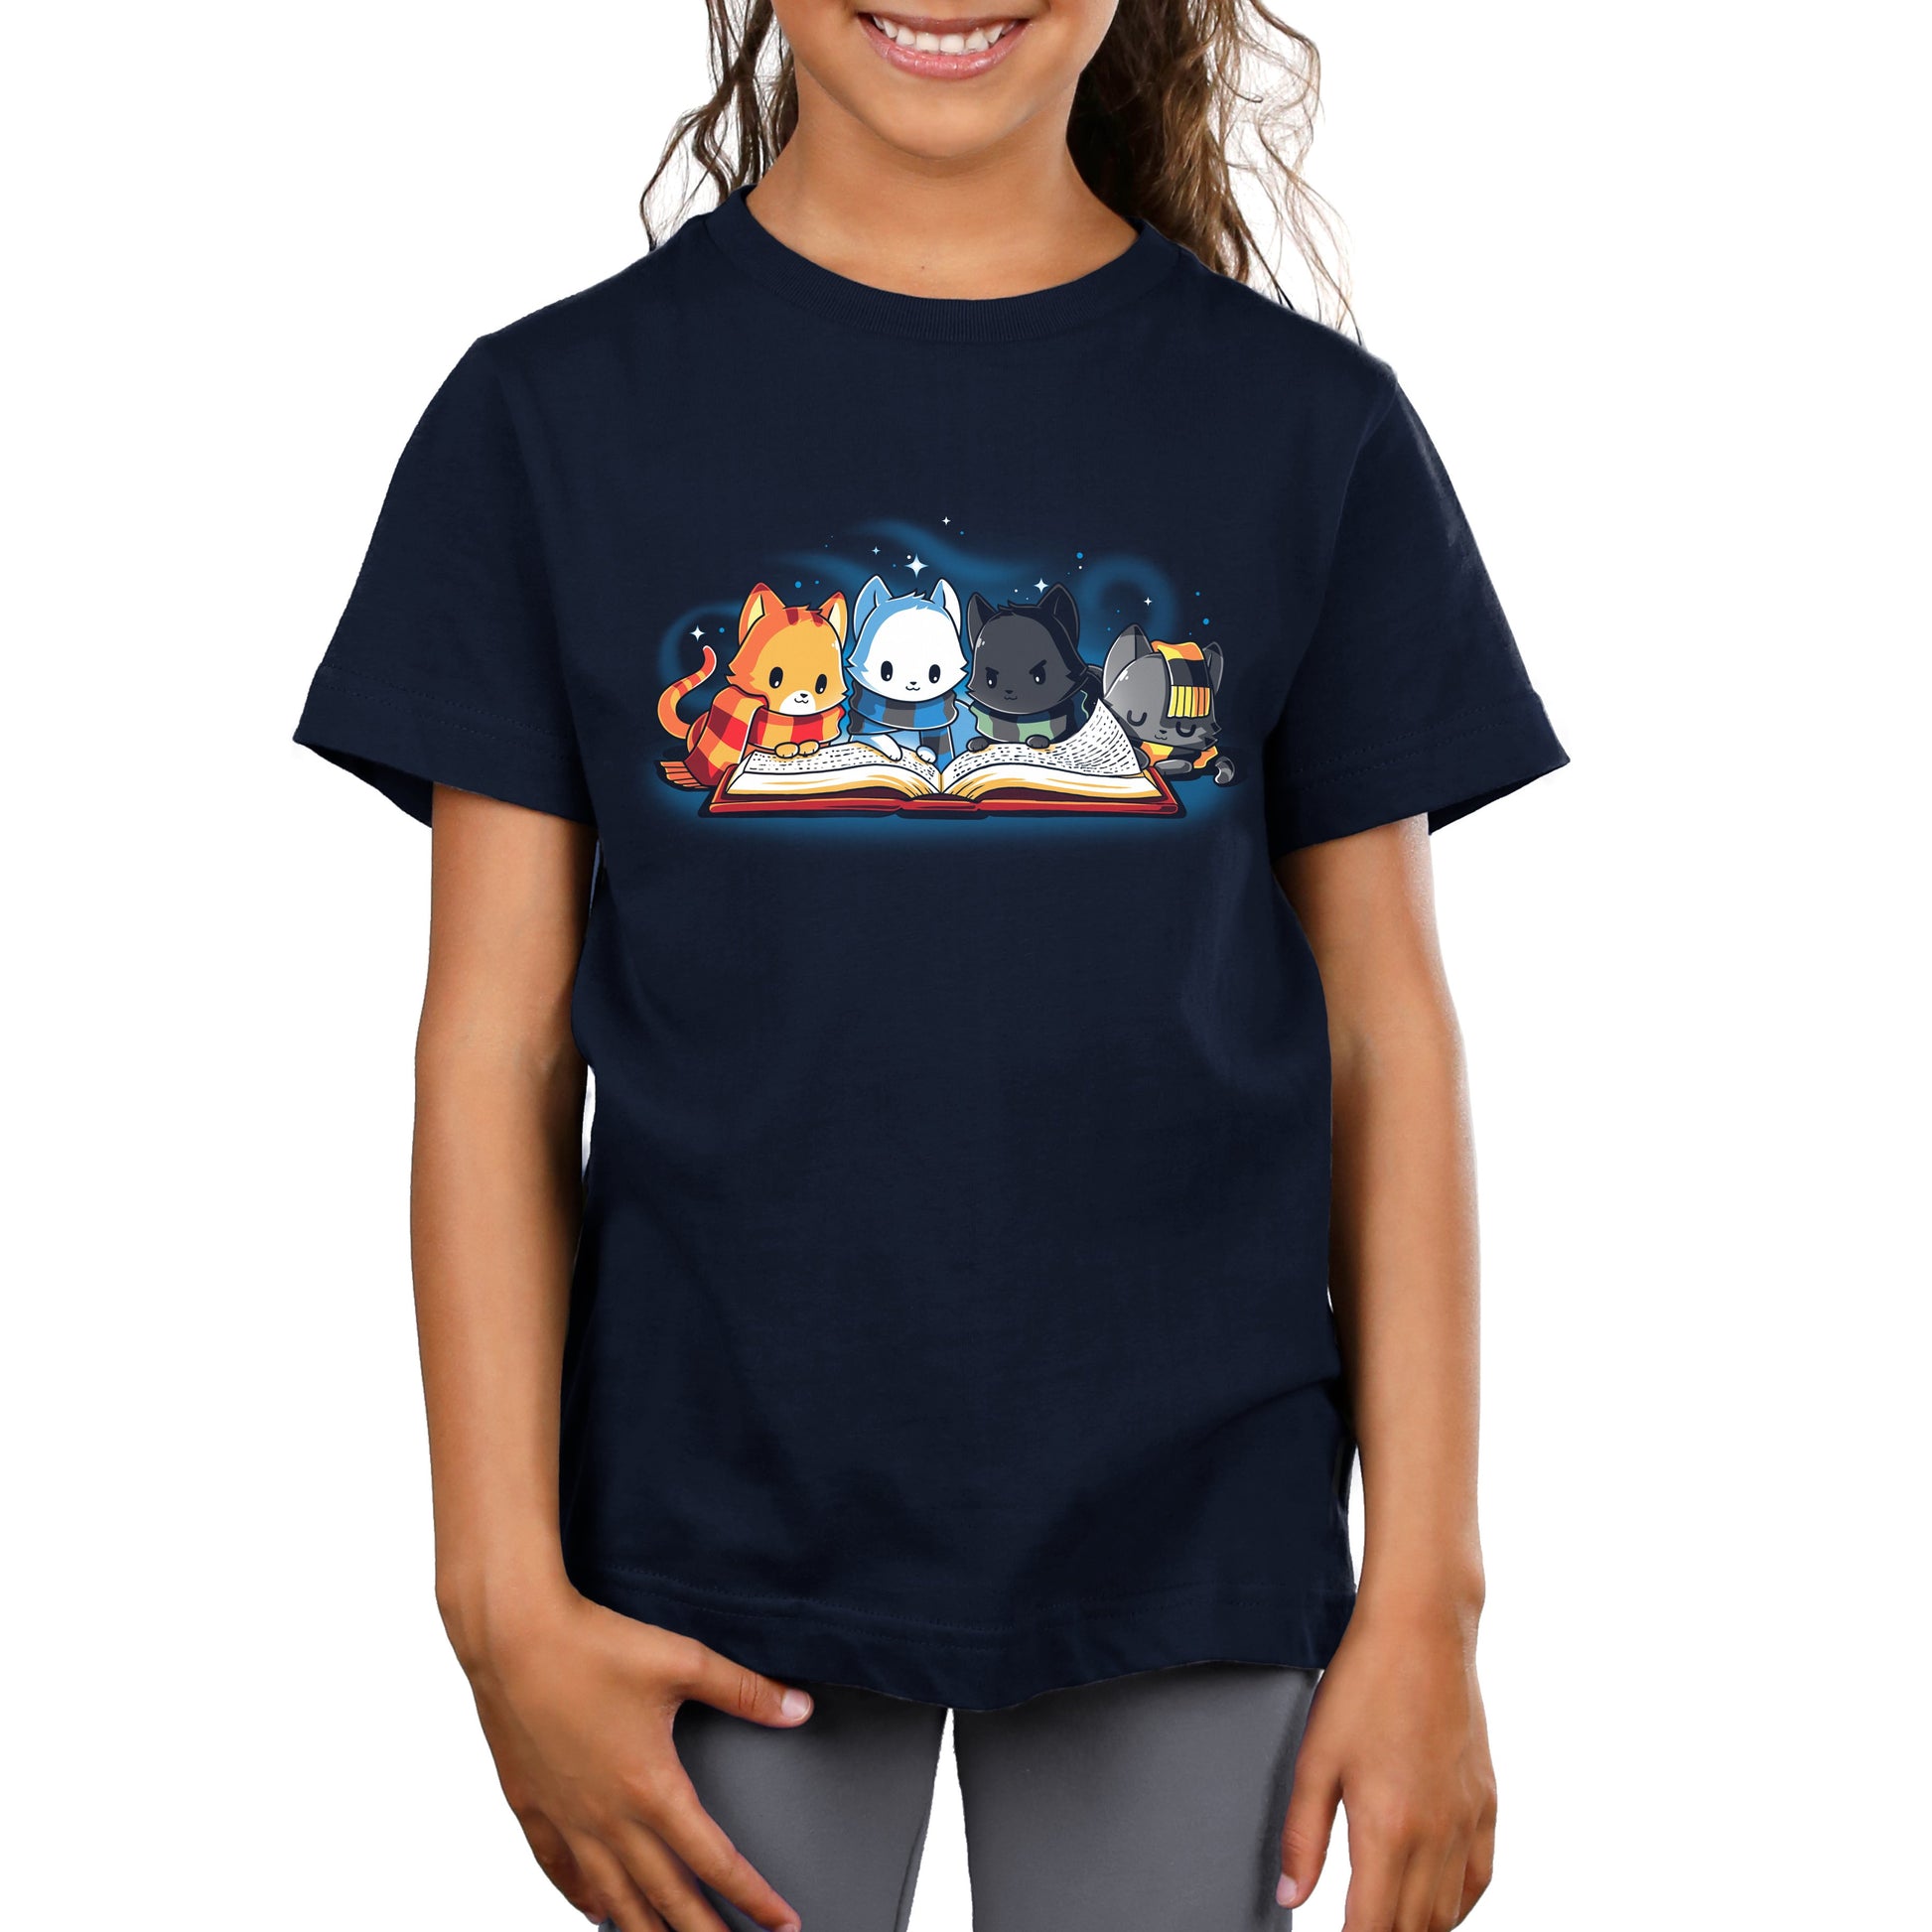 A girl wearing a TeeTurtle t-shirt with cats on it.